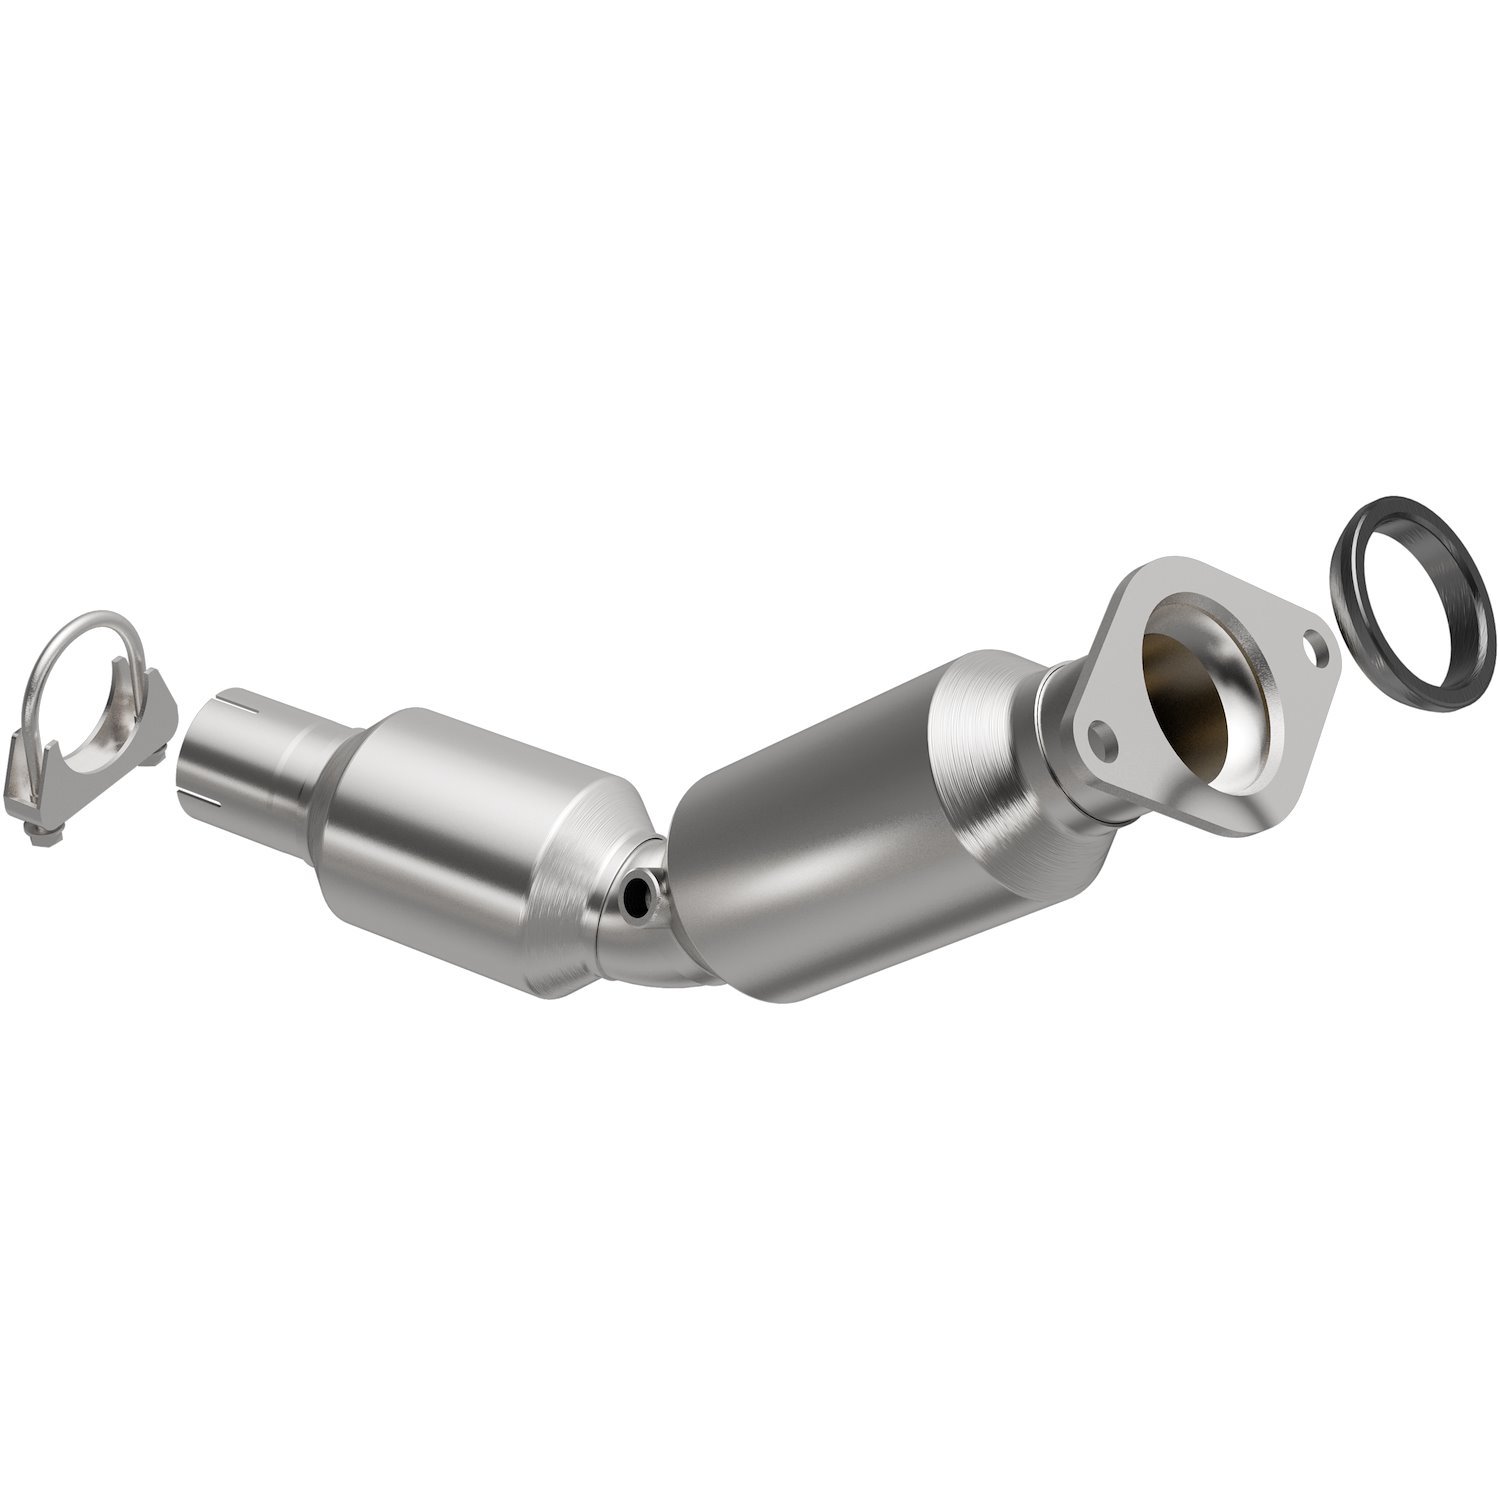 California Grade CARB Compliant Direct-Fit Catalytic Converter 5631455